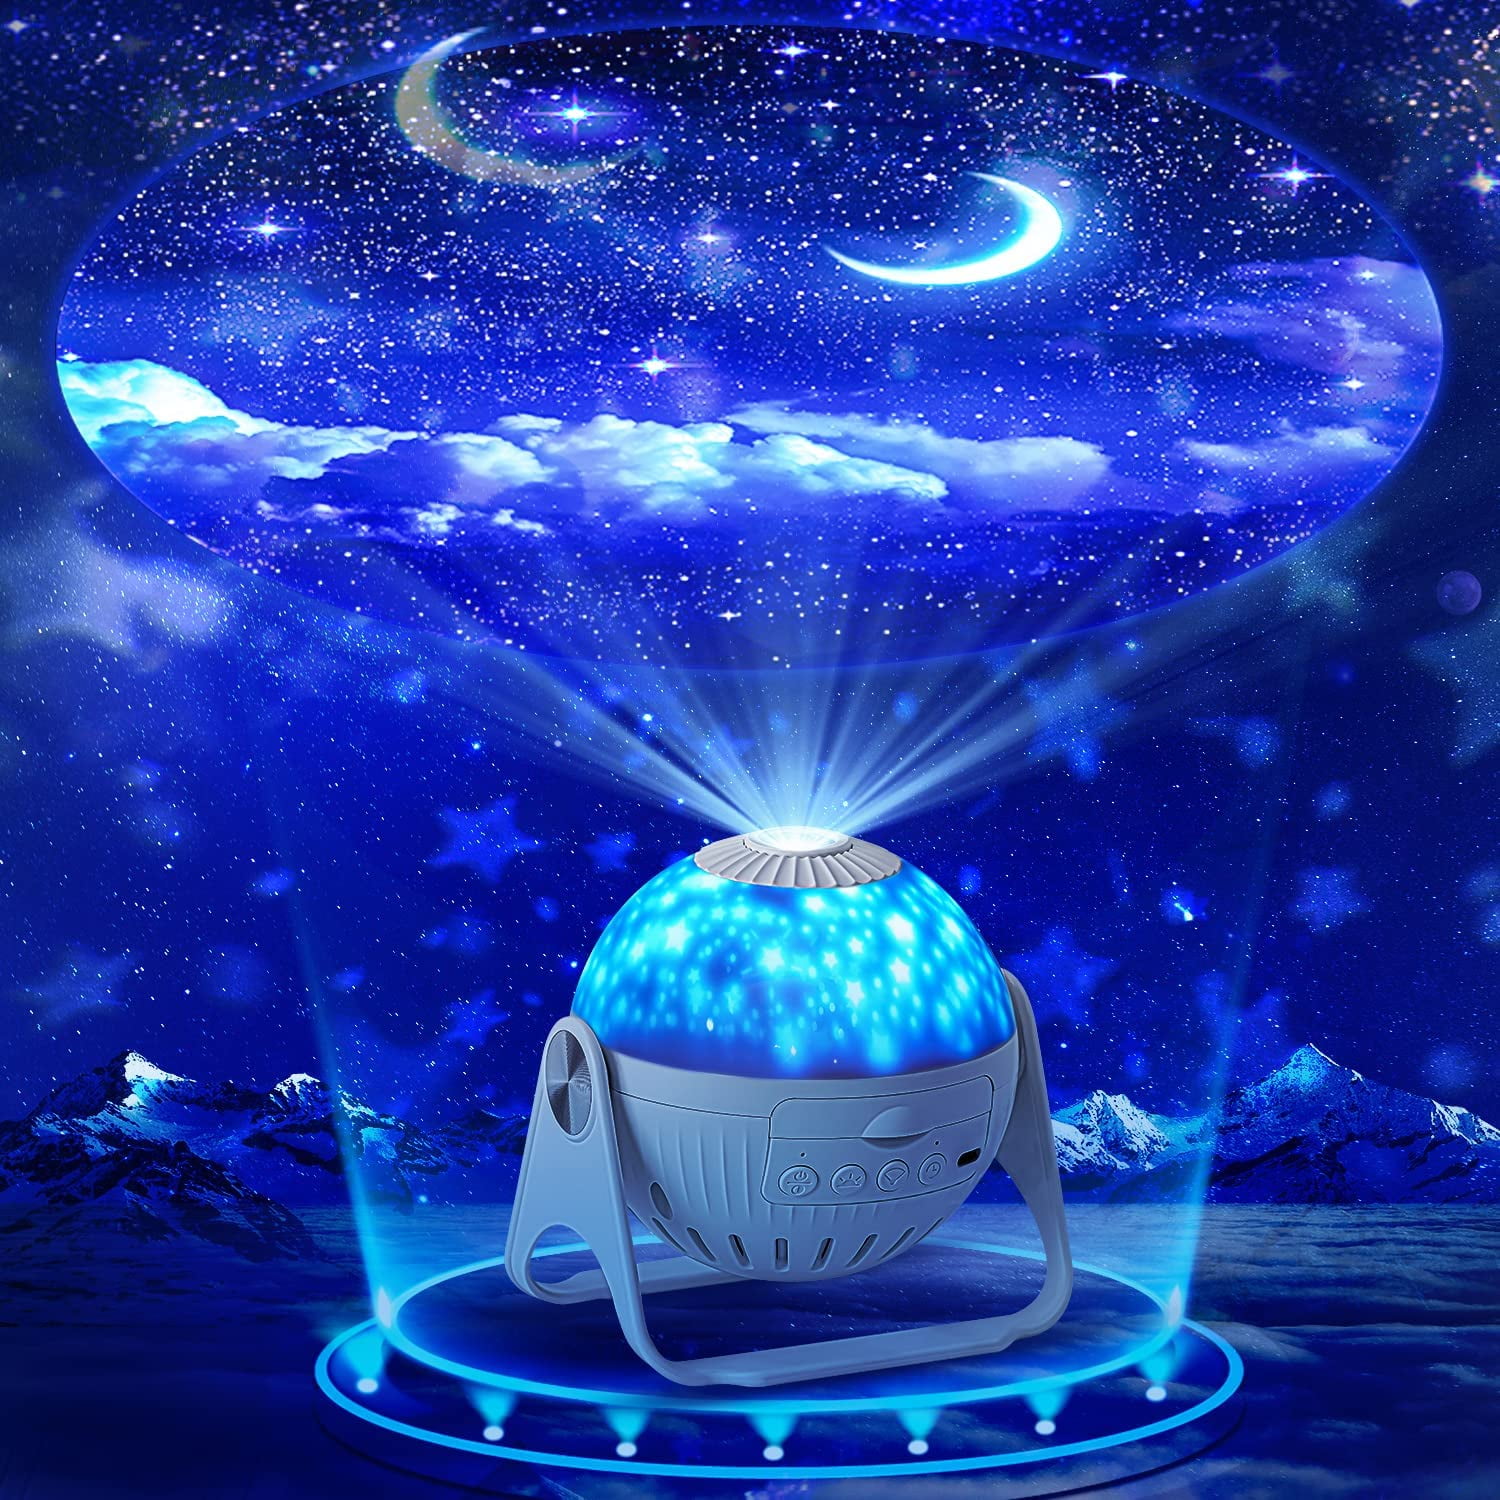 7 in 1 Planetarium Projector, Galaxy Projector Star Projector, Moon Lamp Baby Night Light Star Projector RC, 360° Rotation Ceiling Projector for Bedroom Night Light Projector for Kids - Walmart.com